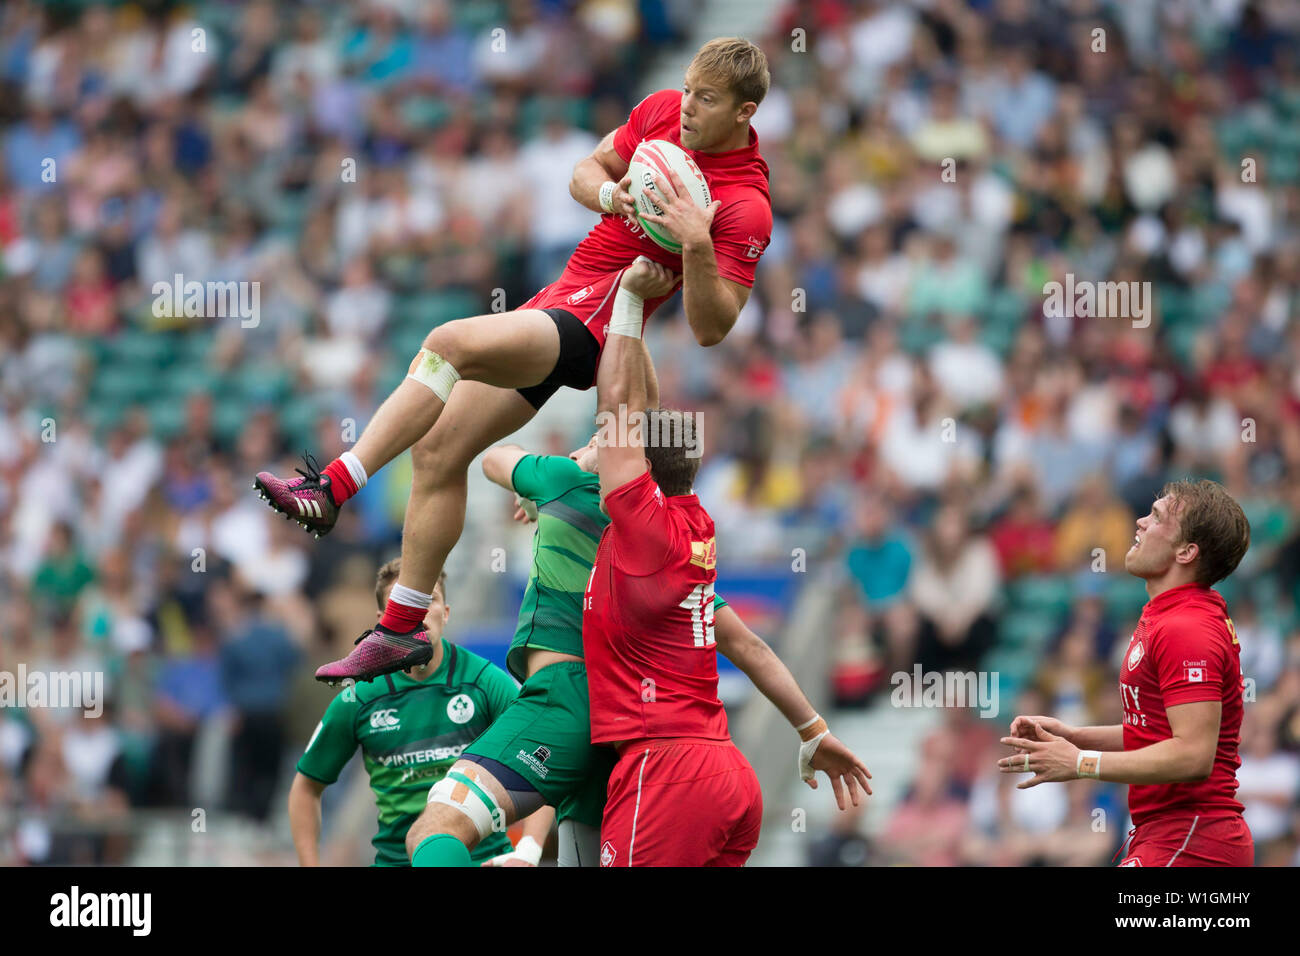 26 May 2019, Great Britain, London: The penultimate tournament of the HSBC World Rugby Sevens Series on 25 and 26 May 2019 in London (GB). Harry Jones (Canada, 11, with ball). Photo: Jürgen Kessler/dpa Stock Photo